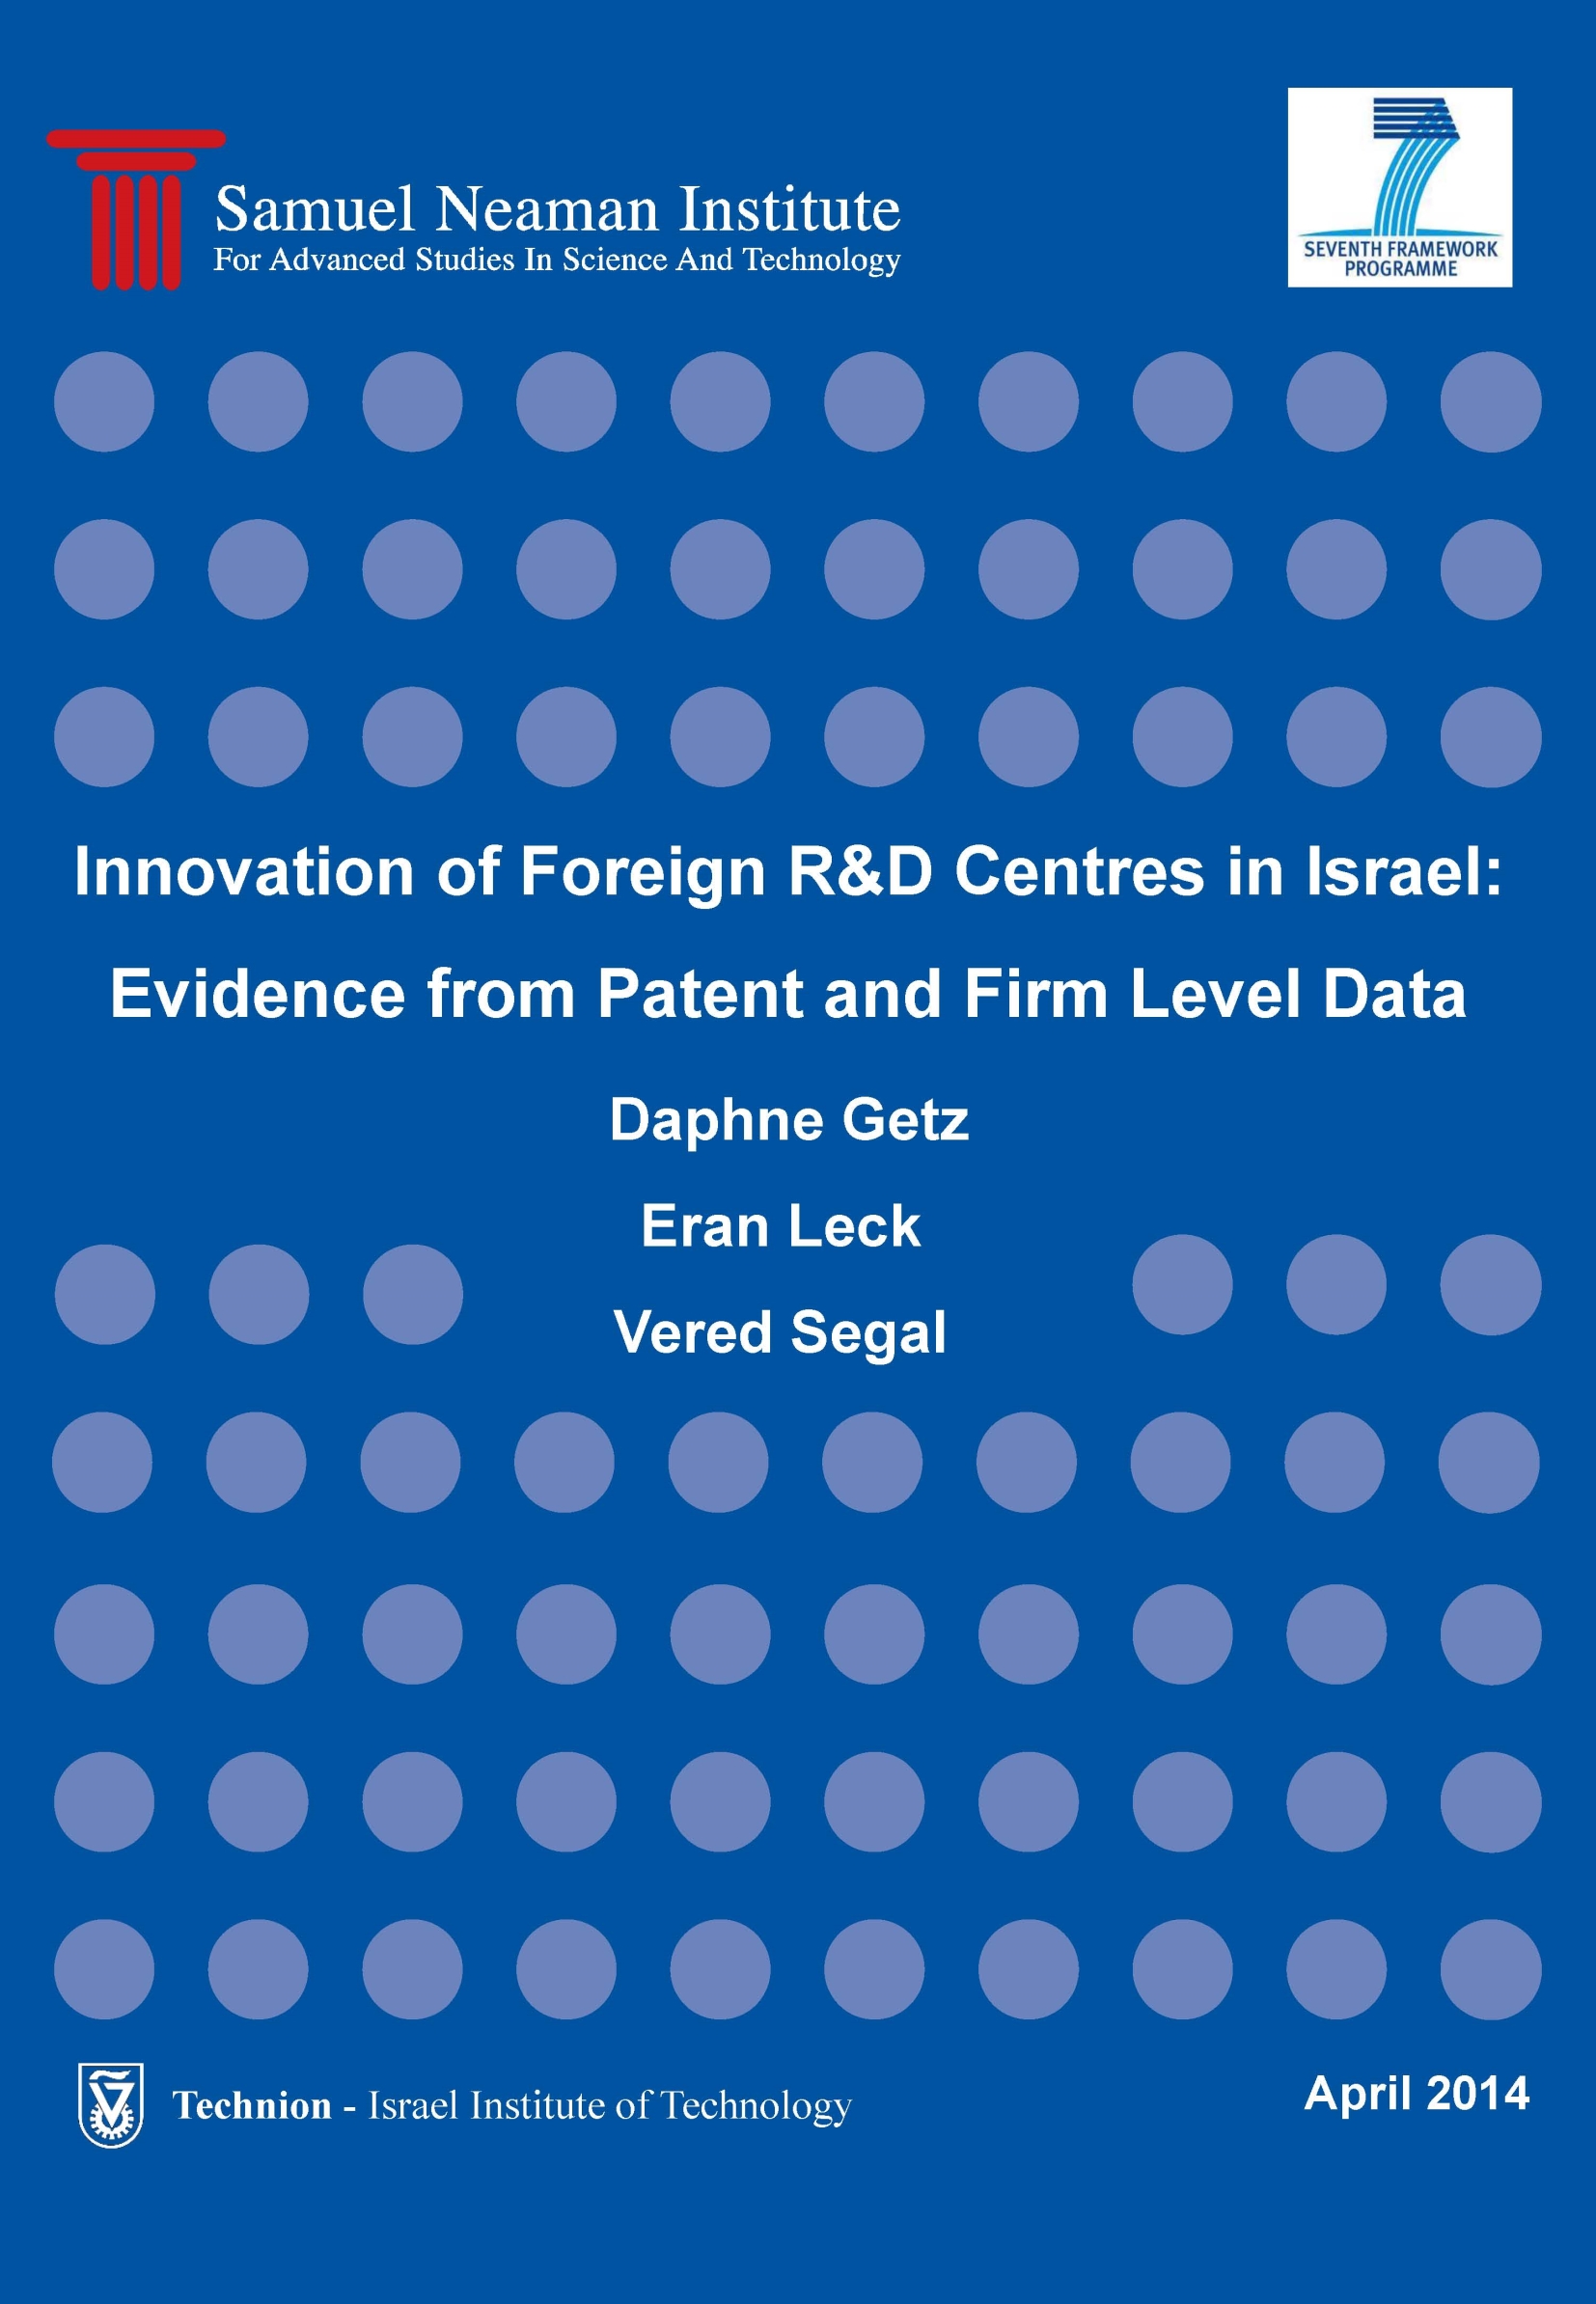 Innovation of Foreign R&D Centres in Israel: Evidence from Patent and Firm Level Data